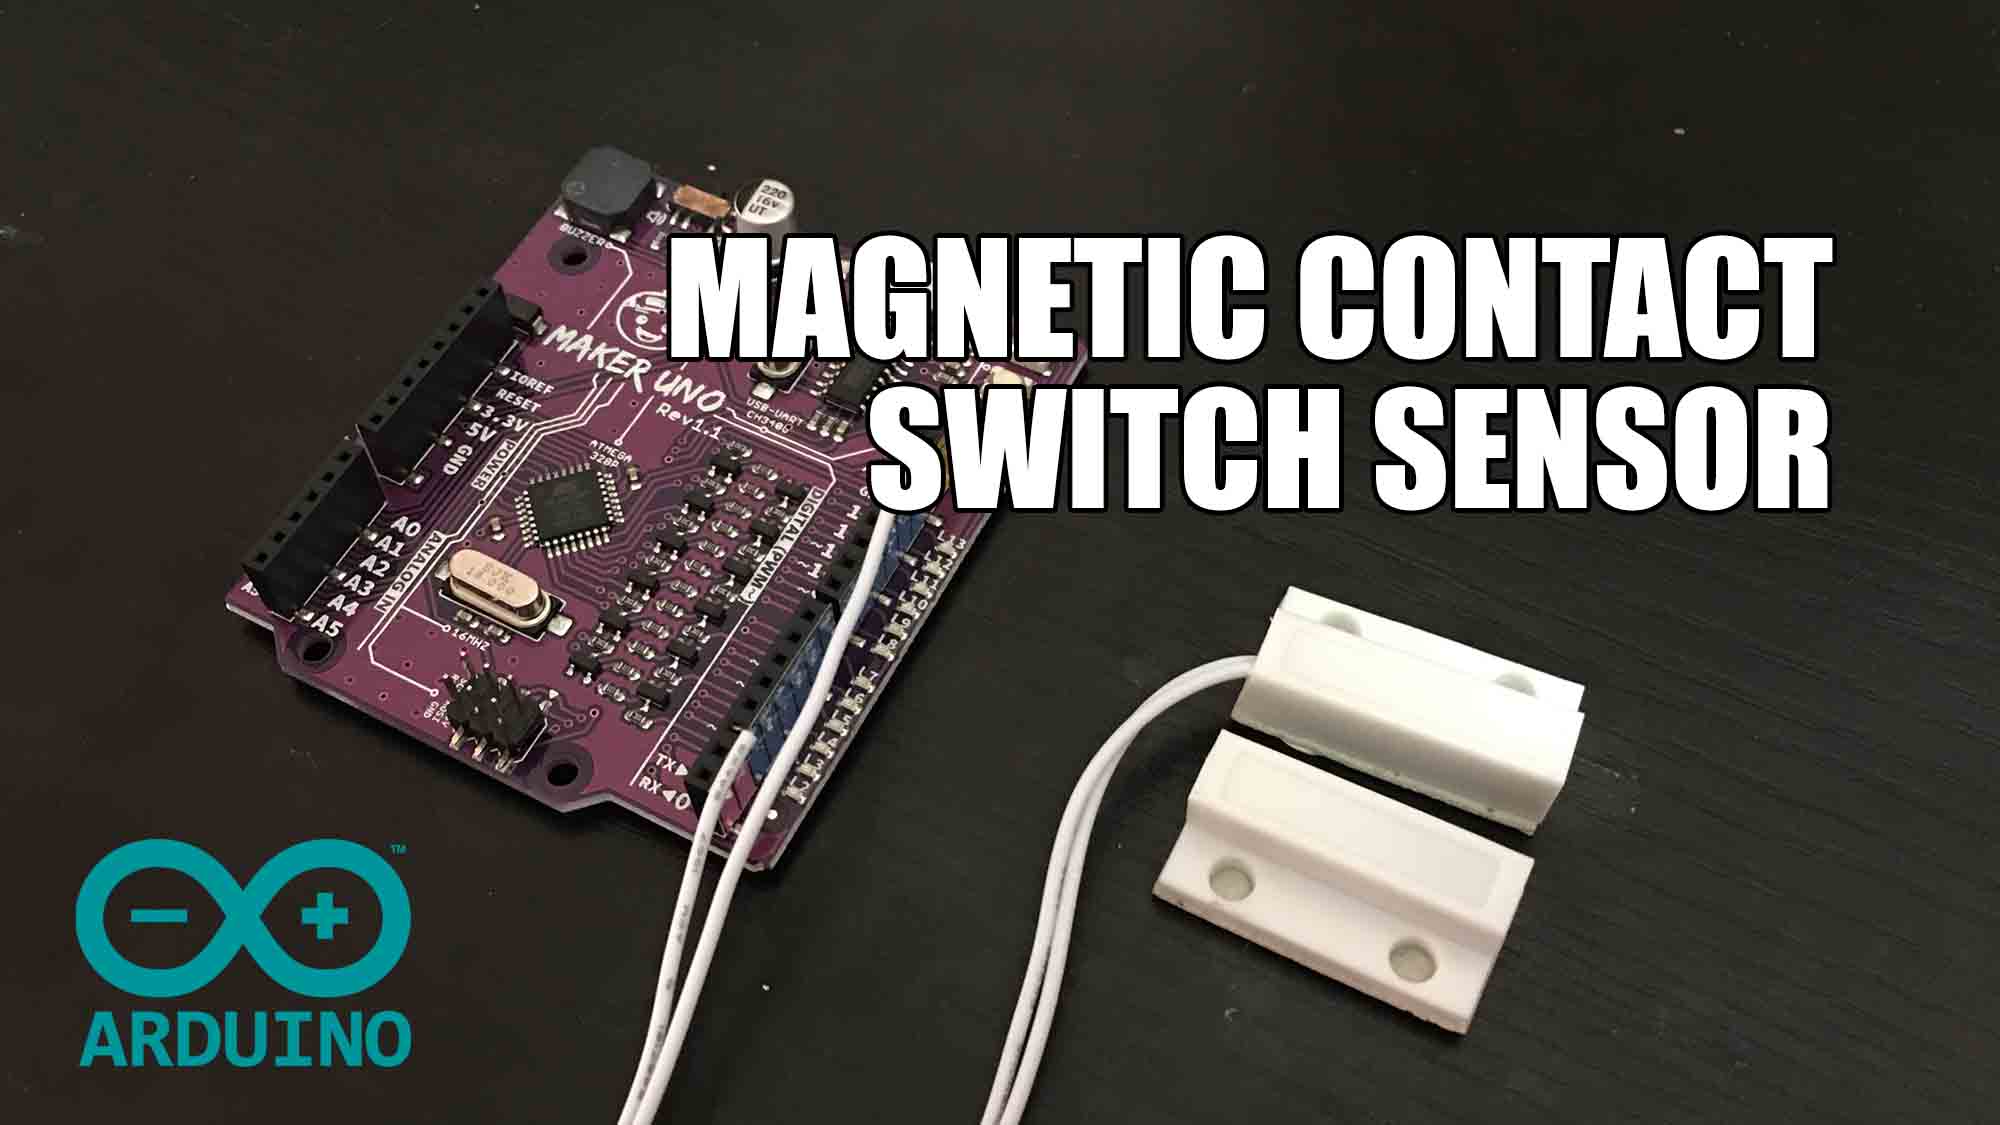 Magnetic Contact Switch Sensor with Arduino.